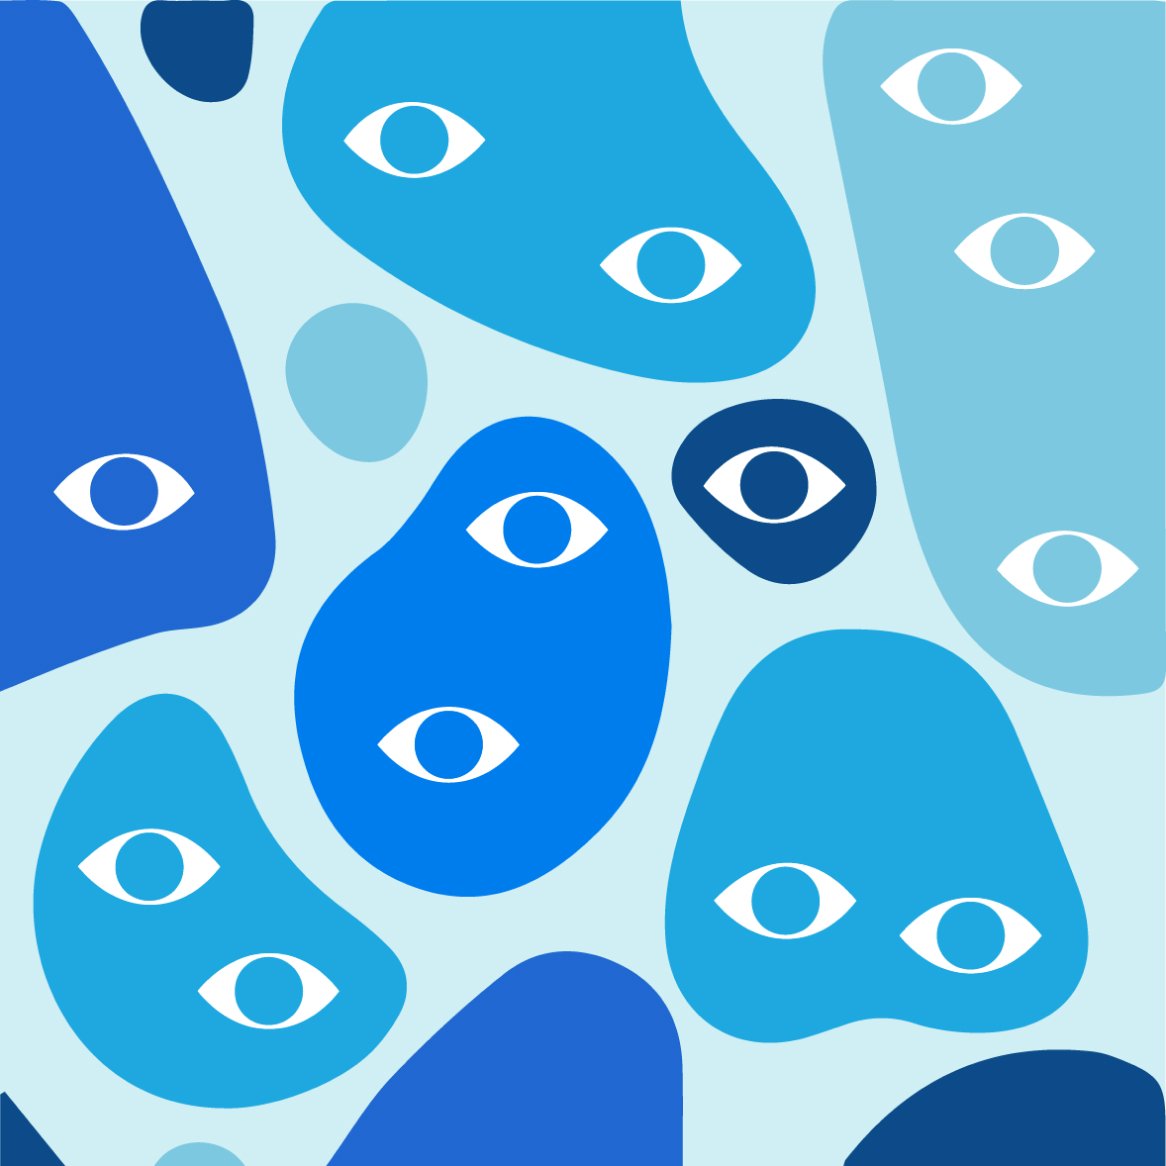 Original artwork showing eyes and floaters